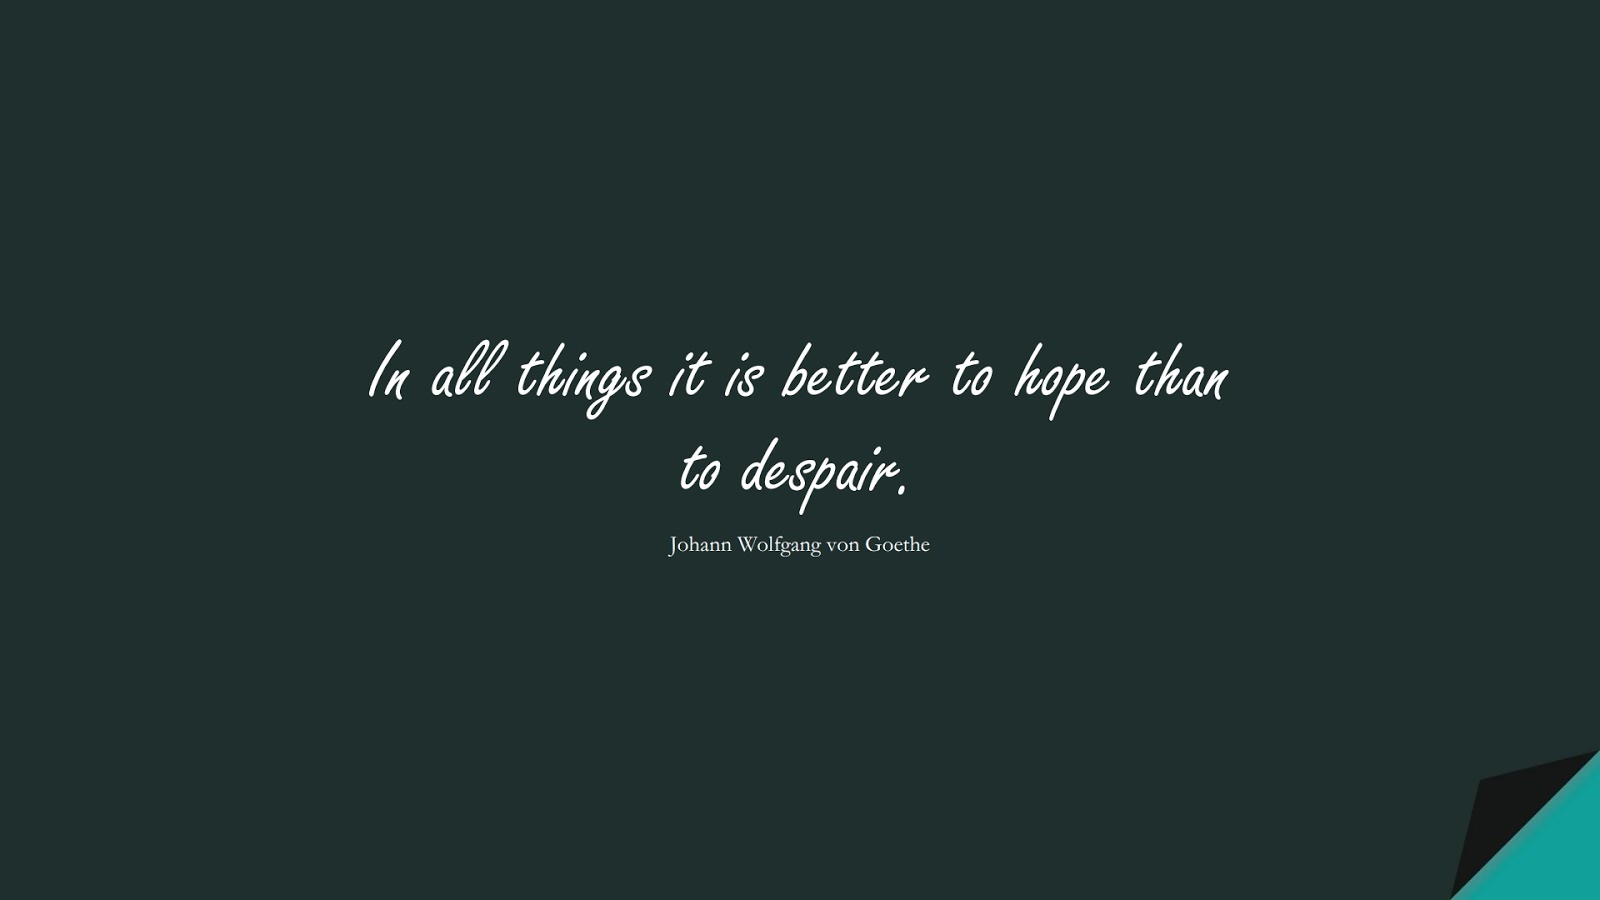 In all things it is better to hope than to despair. (Johann Wolfgang von Goethe);  #HopeQuotes